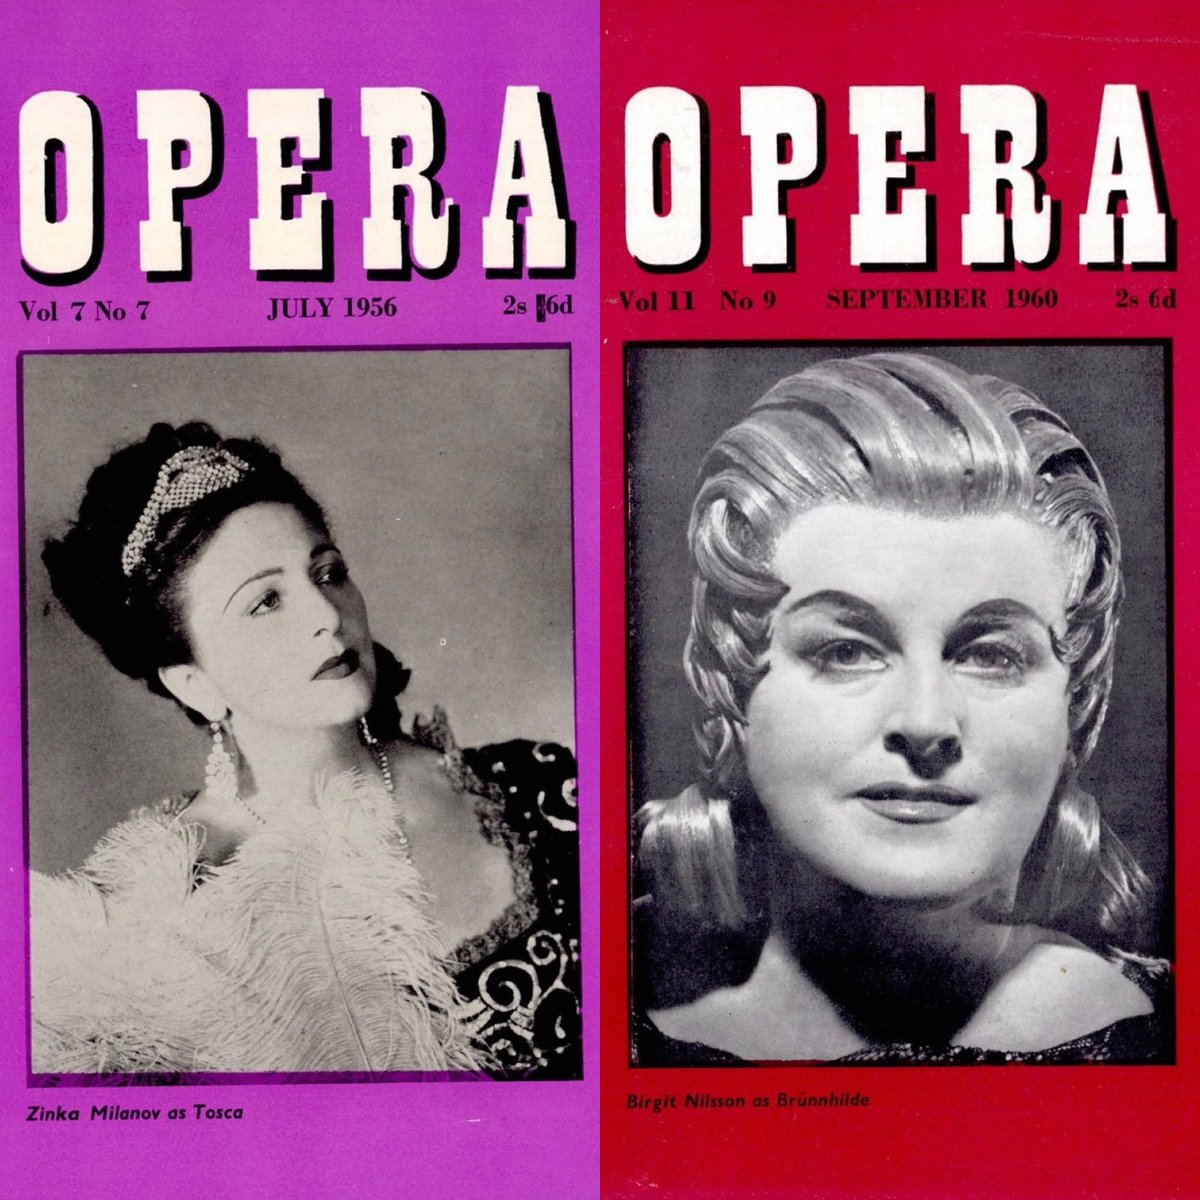 Happy Diva Day! The dramatic sopranos Zinka Milanov and Birgit Nilsson were both born on May 17, in 1906 and 1918 respectively.